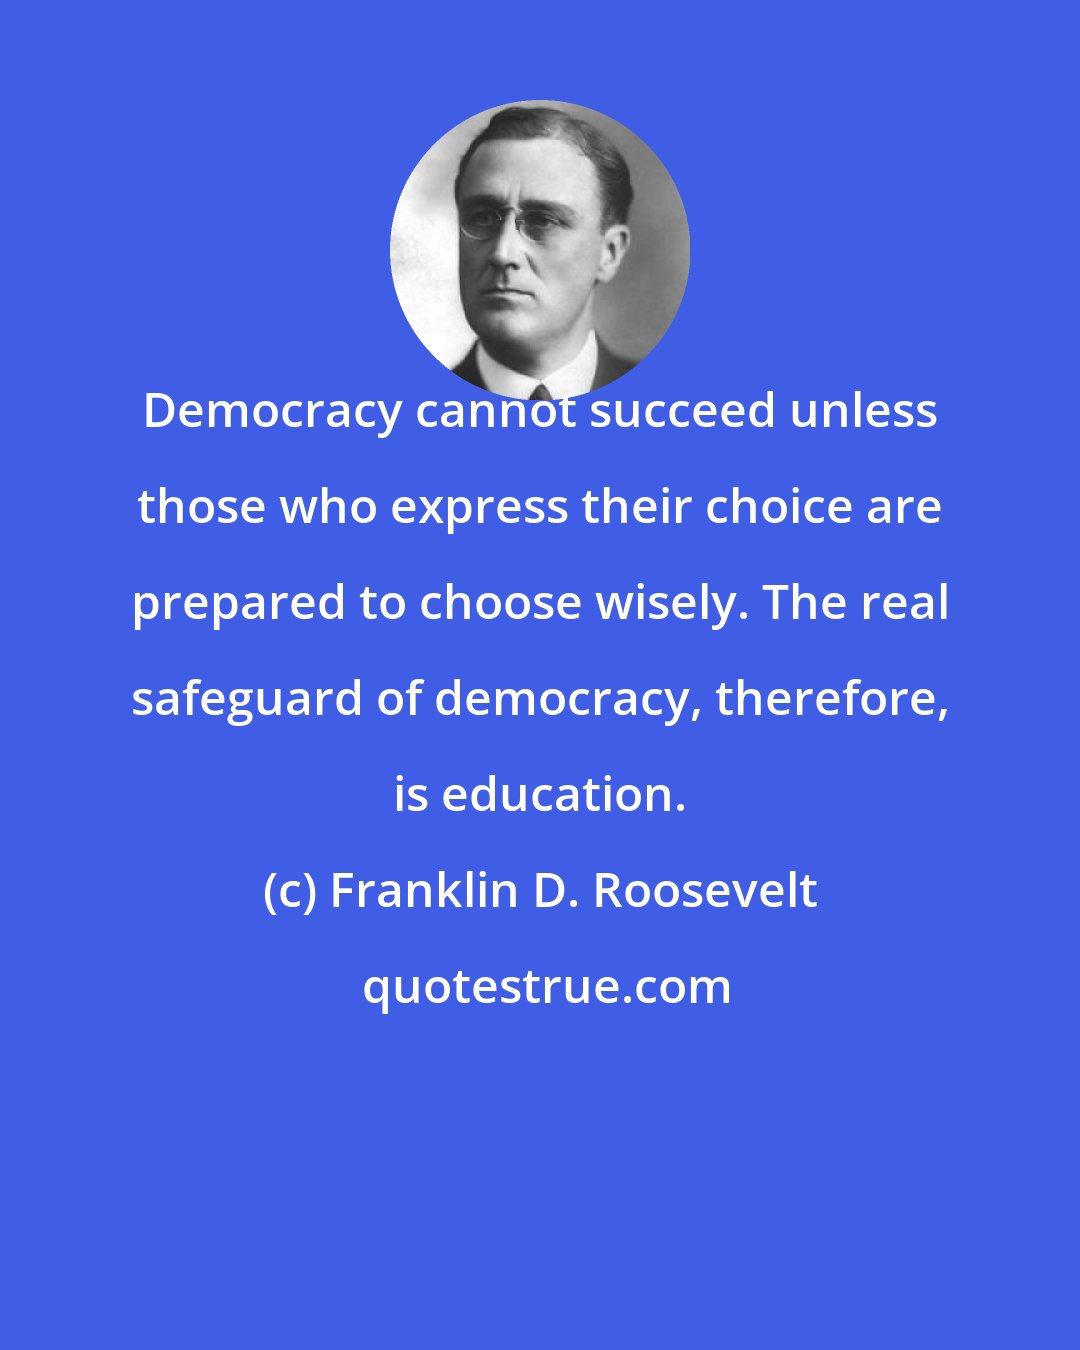 Franklin D. Roosevelt: Democracy cannot succeed unless those who express their choice are prepared to choose wisely. The real safeguard of democracy, therefore, is education.